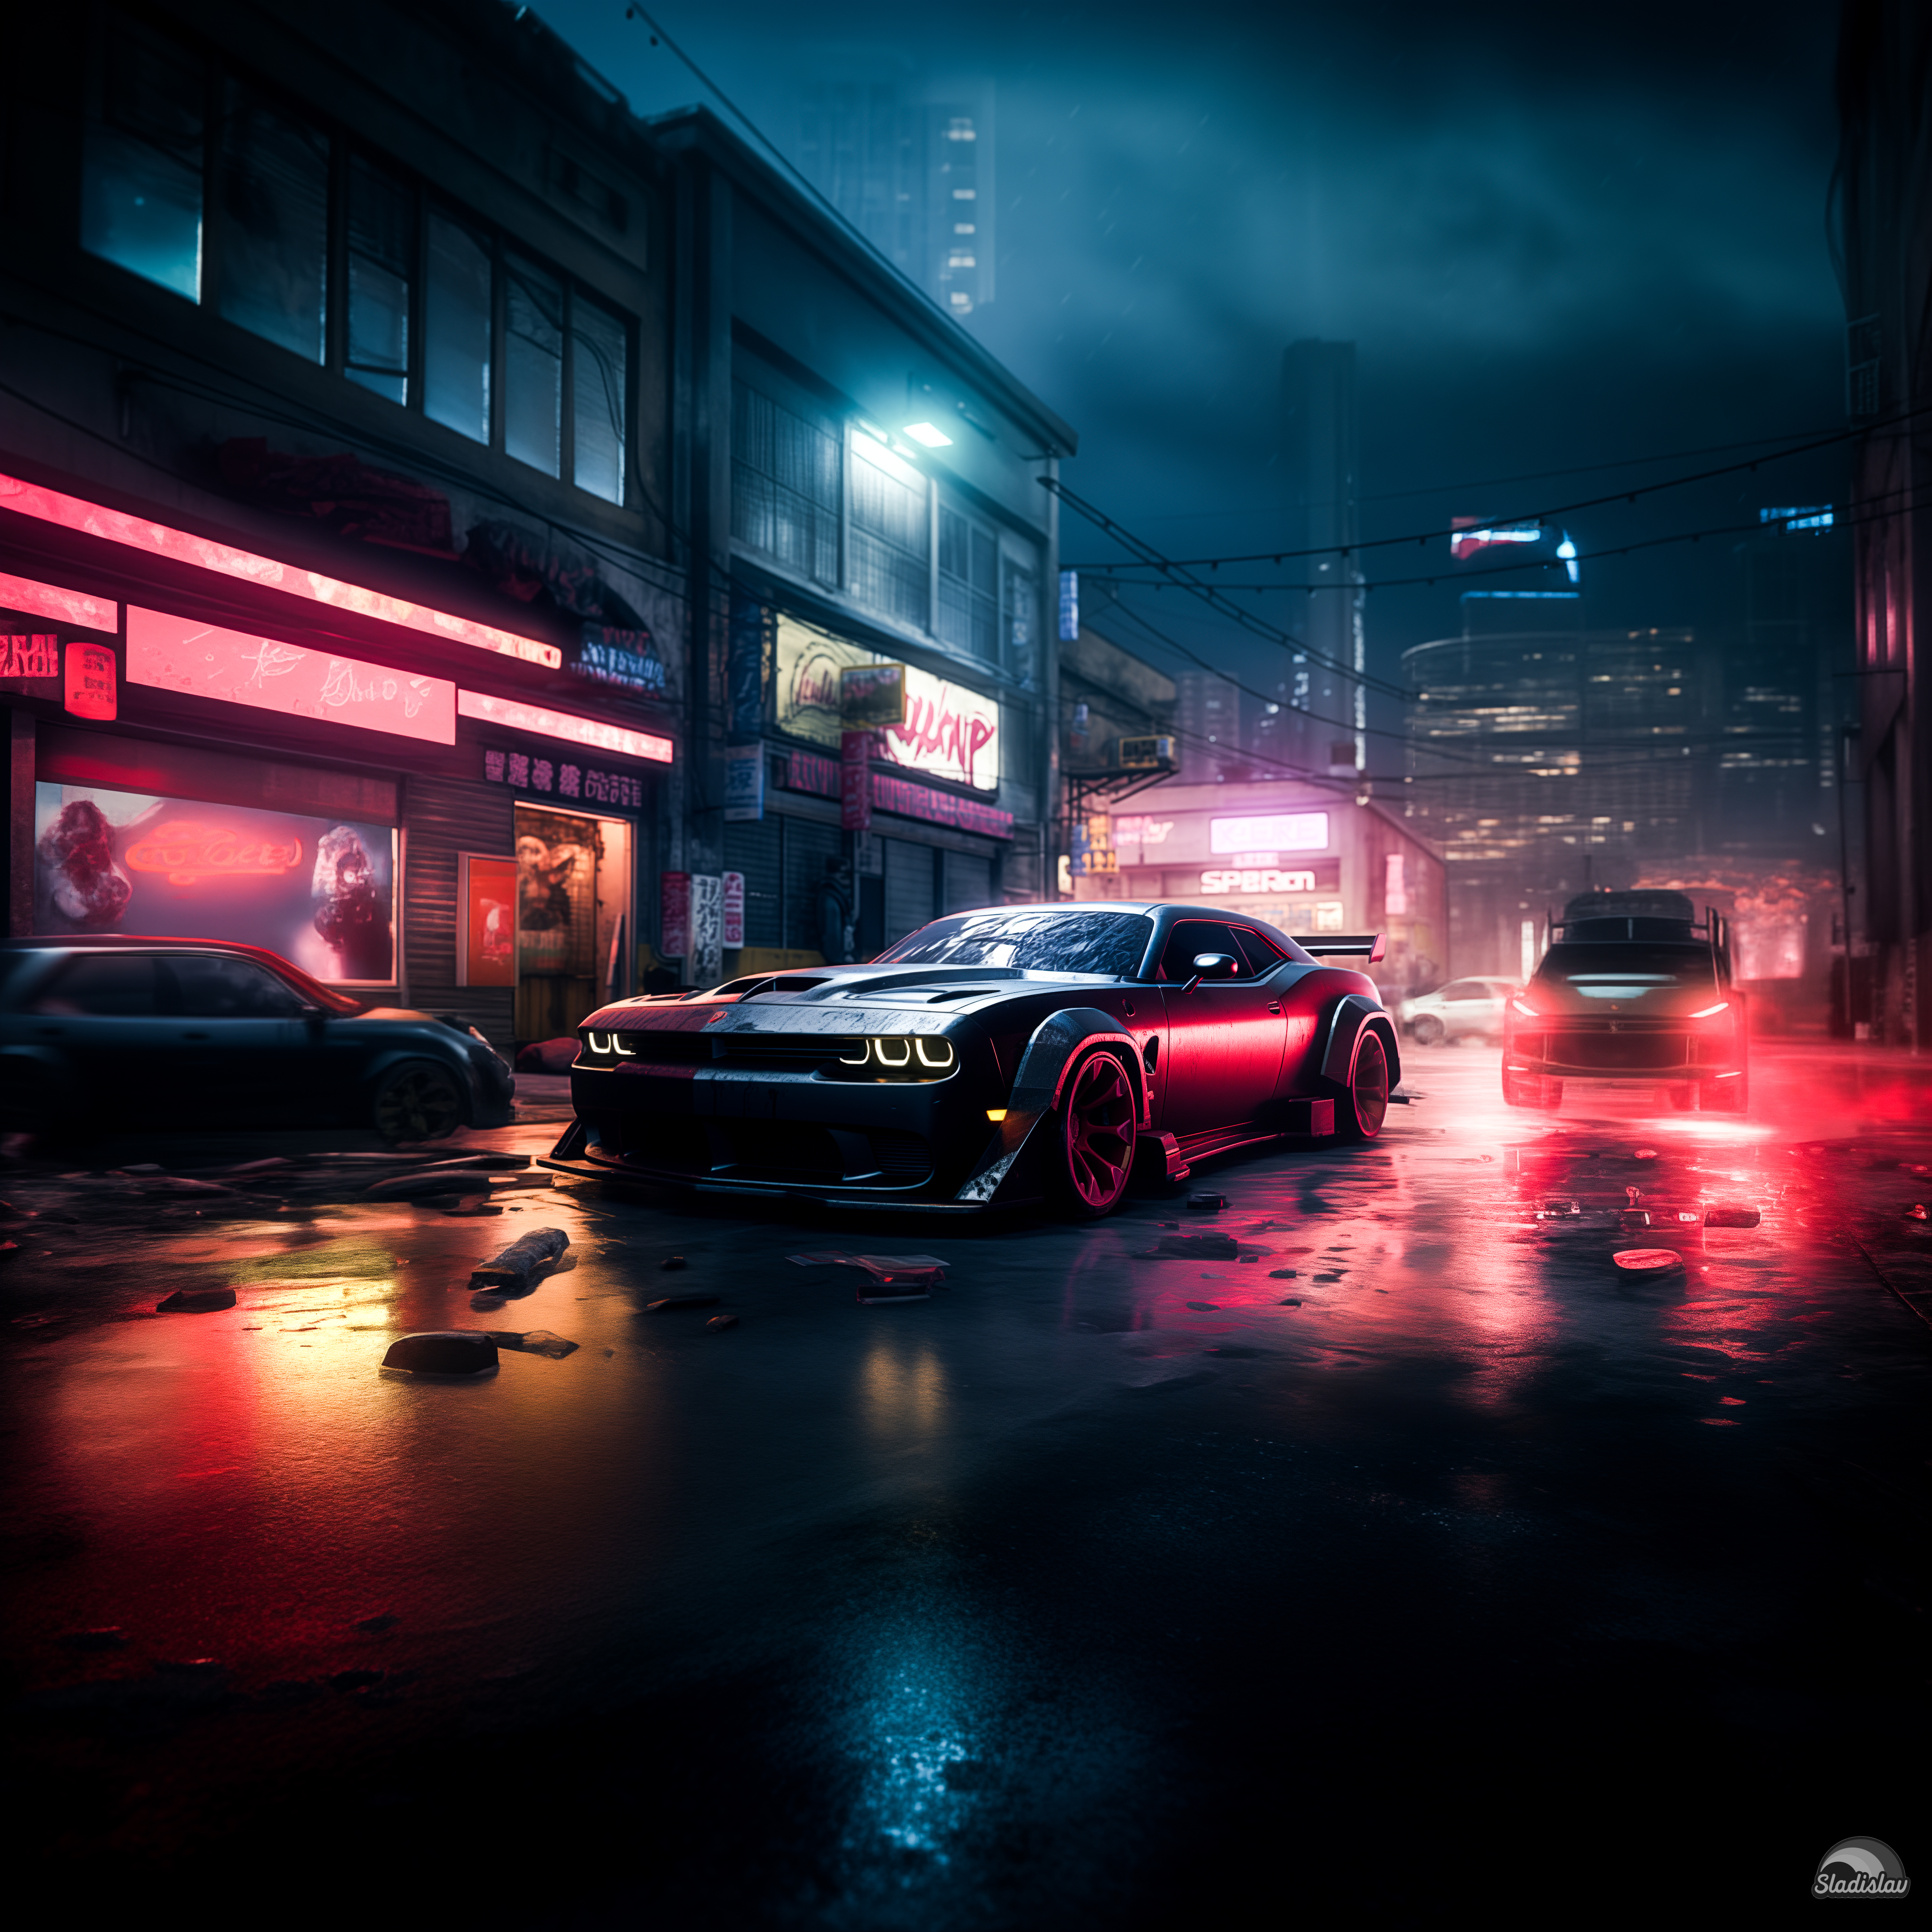 General 4096x4096 AI art Dodge Challenger cyberpunk vehicle frontal view headlights building night sky city lights watermarked car sign city cables neon wet skyscraper depth of field wet road